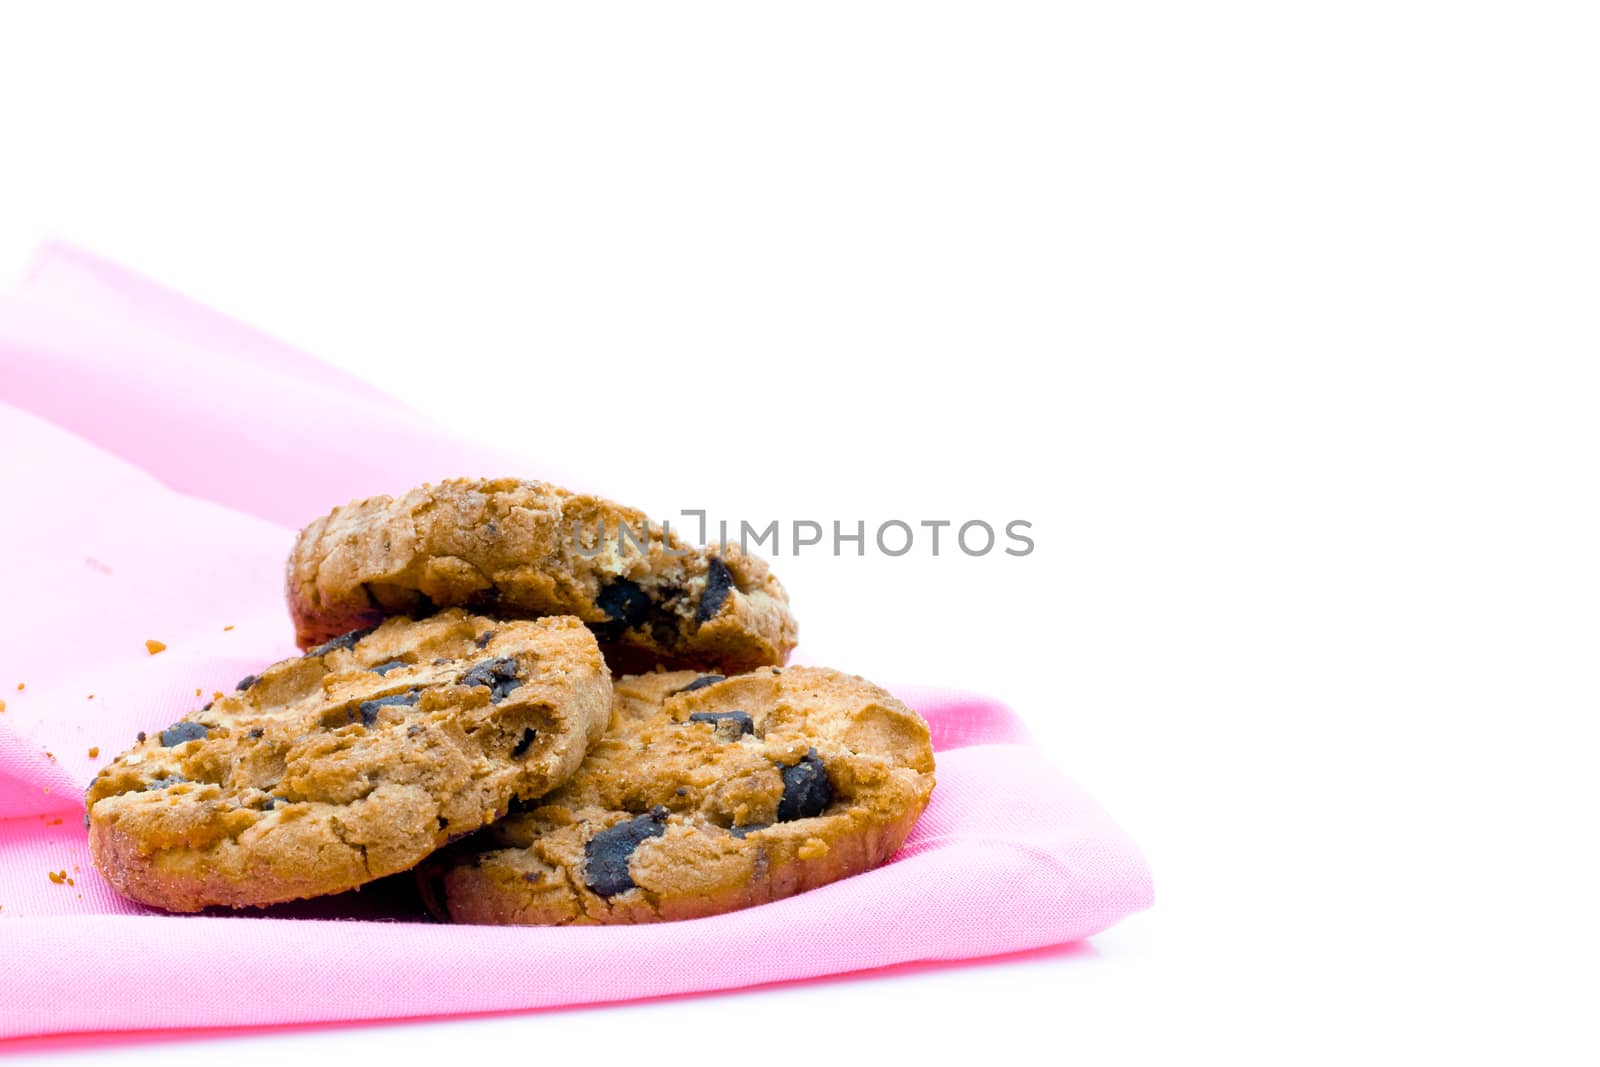 Chocolate cookies on a pink fabric white background